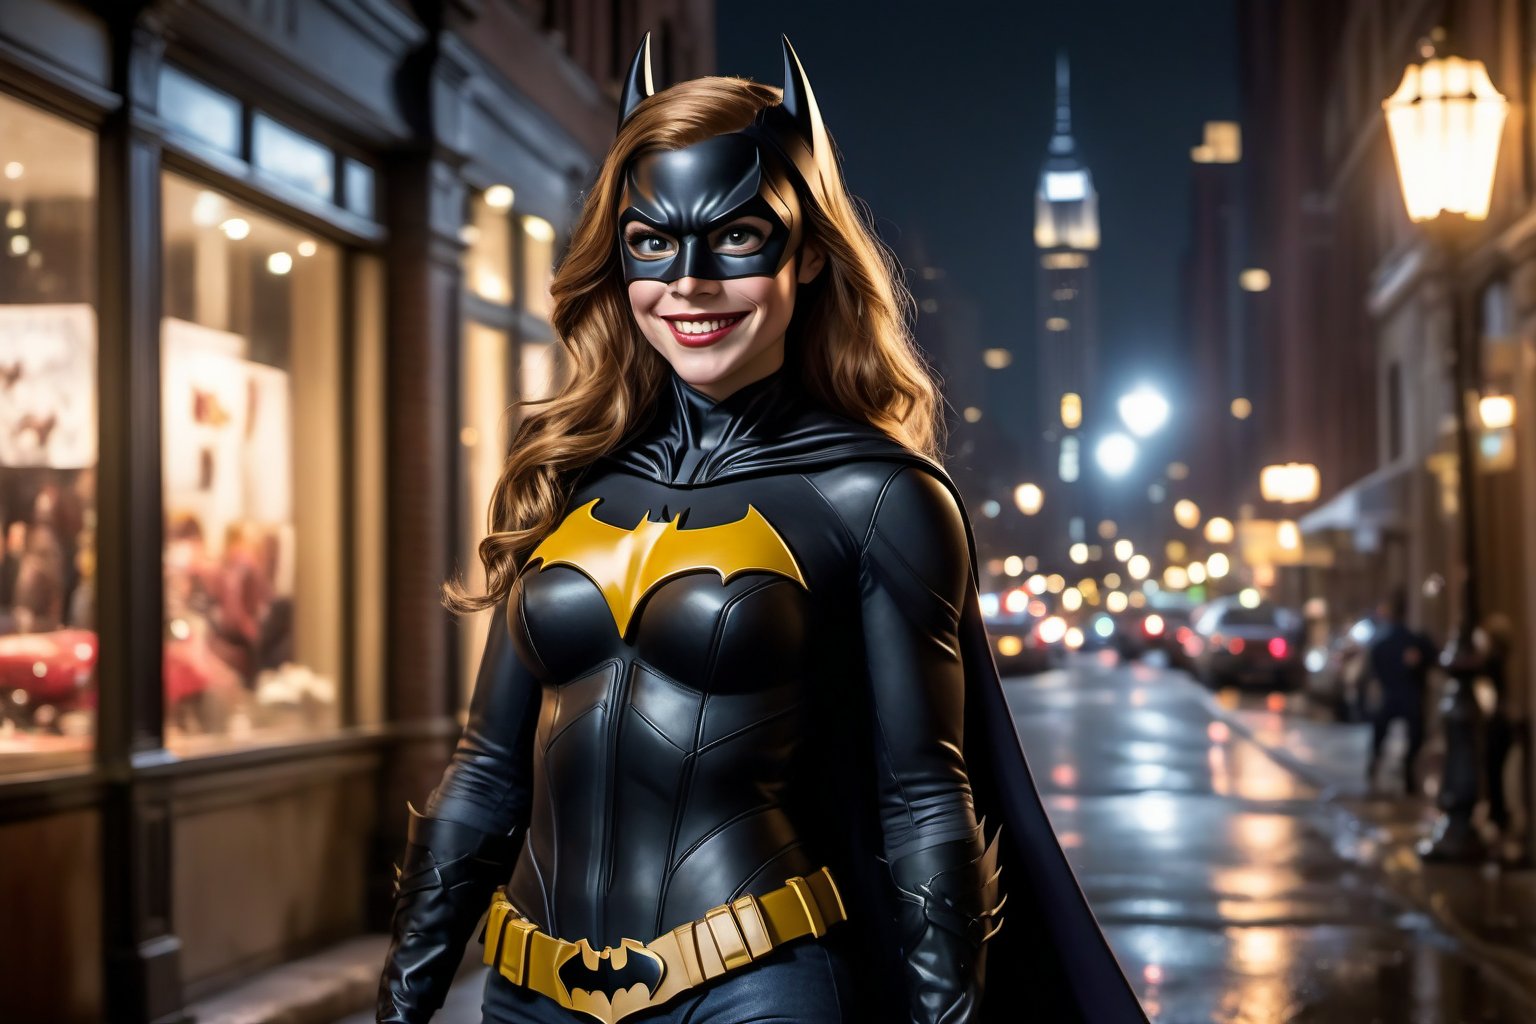 photorealism, canon 5d mk iv, 700mm, full body shot. It's a beautiful night in Gotham City. Smiling Batgirl goes window shopping. There are cars on the street, people strolling on the sidewalk. 